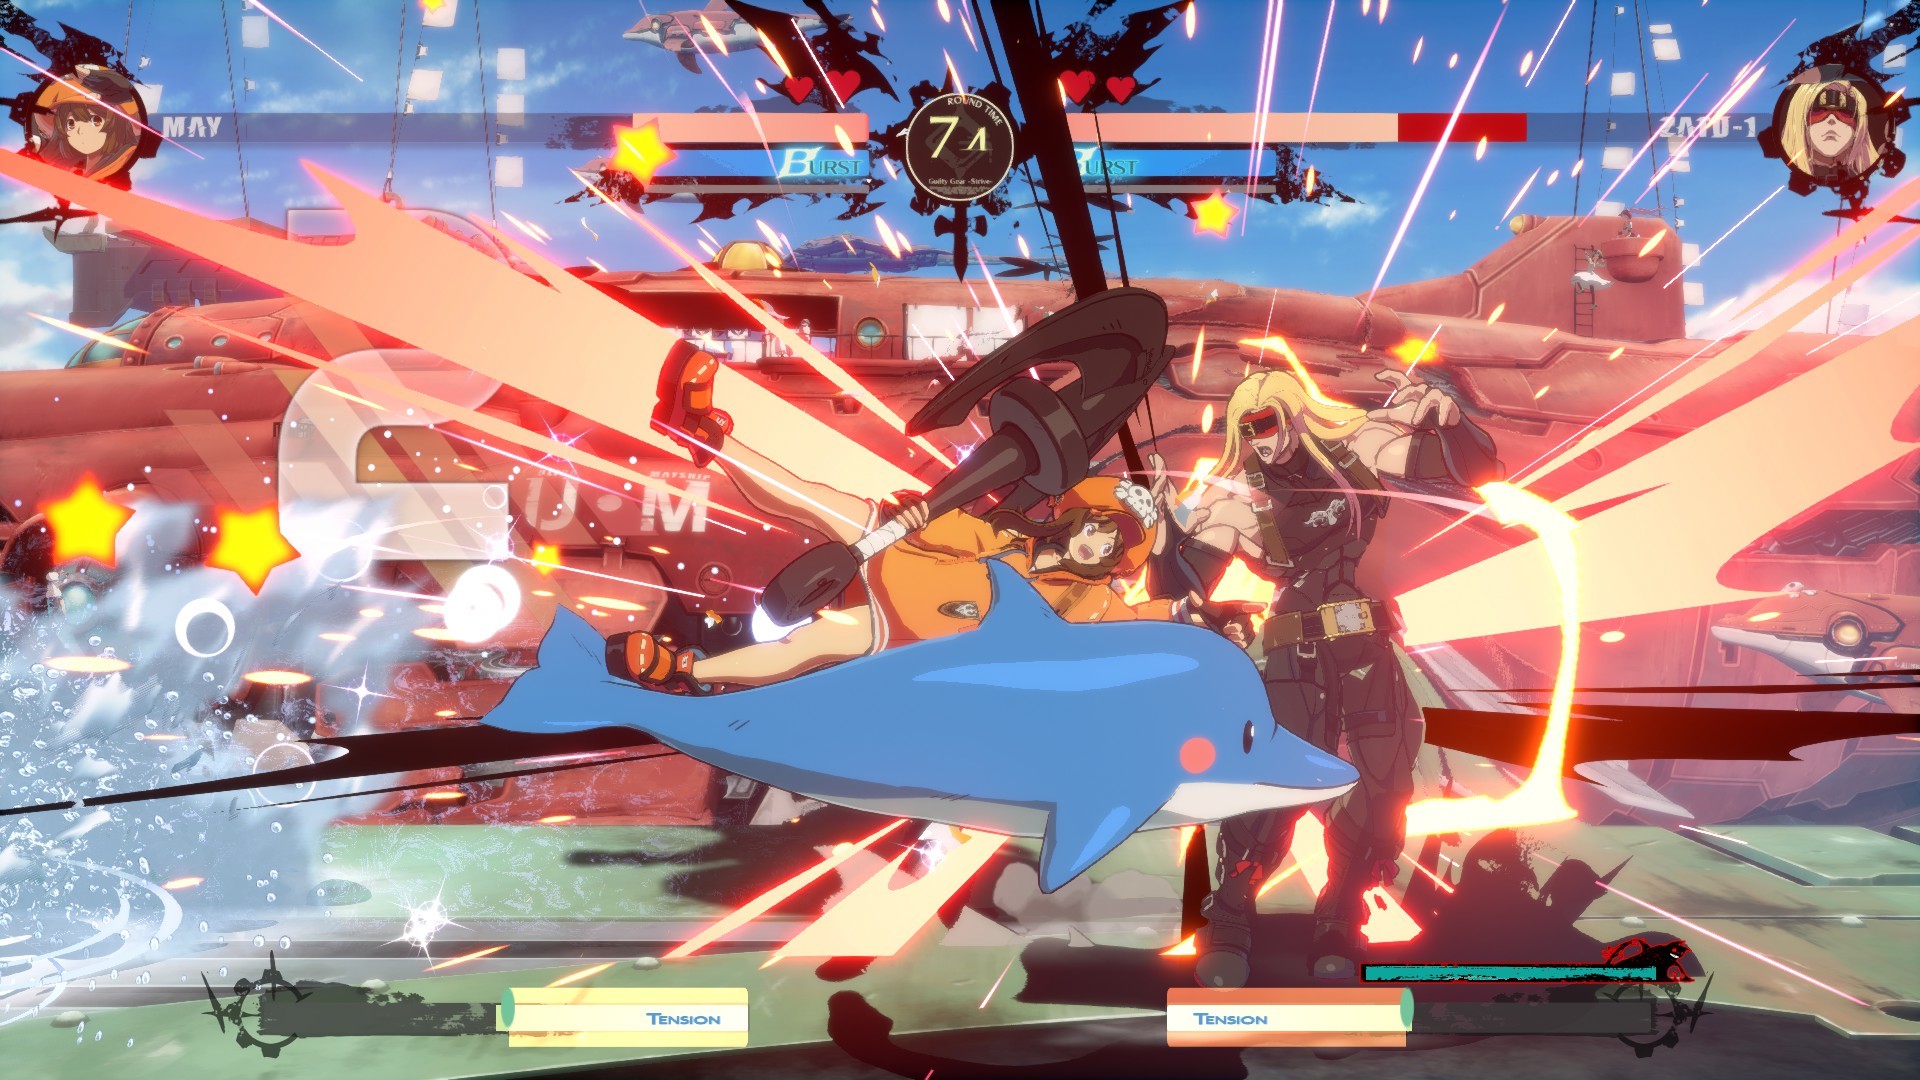 Guilty Gear Strive takes over Steam chart, debuting both in 1st and